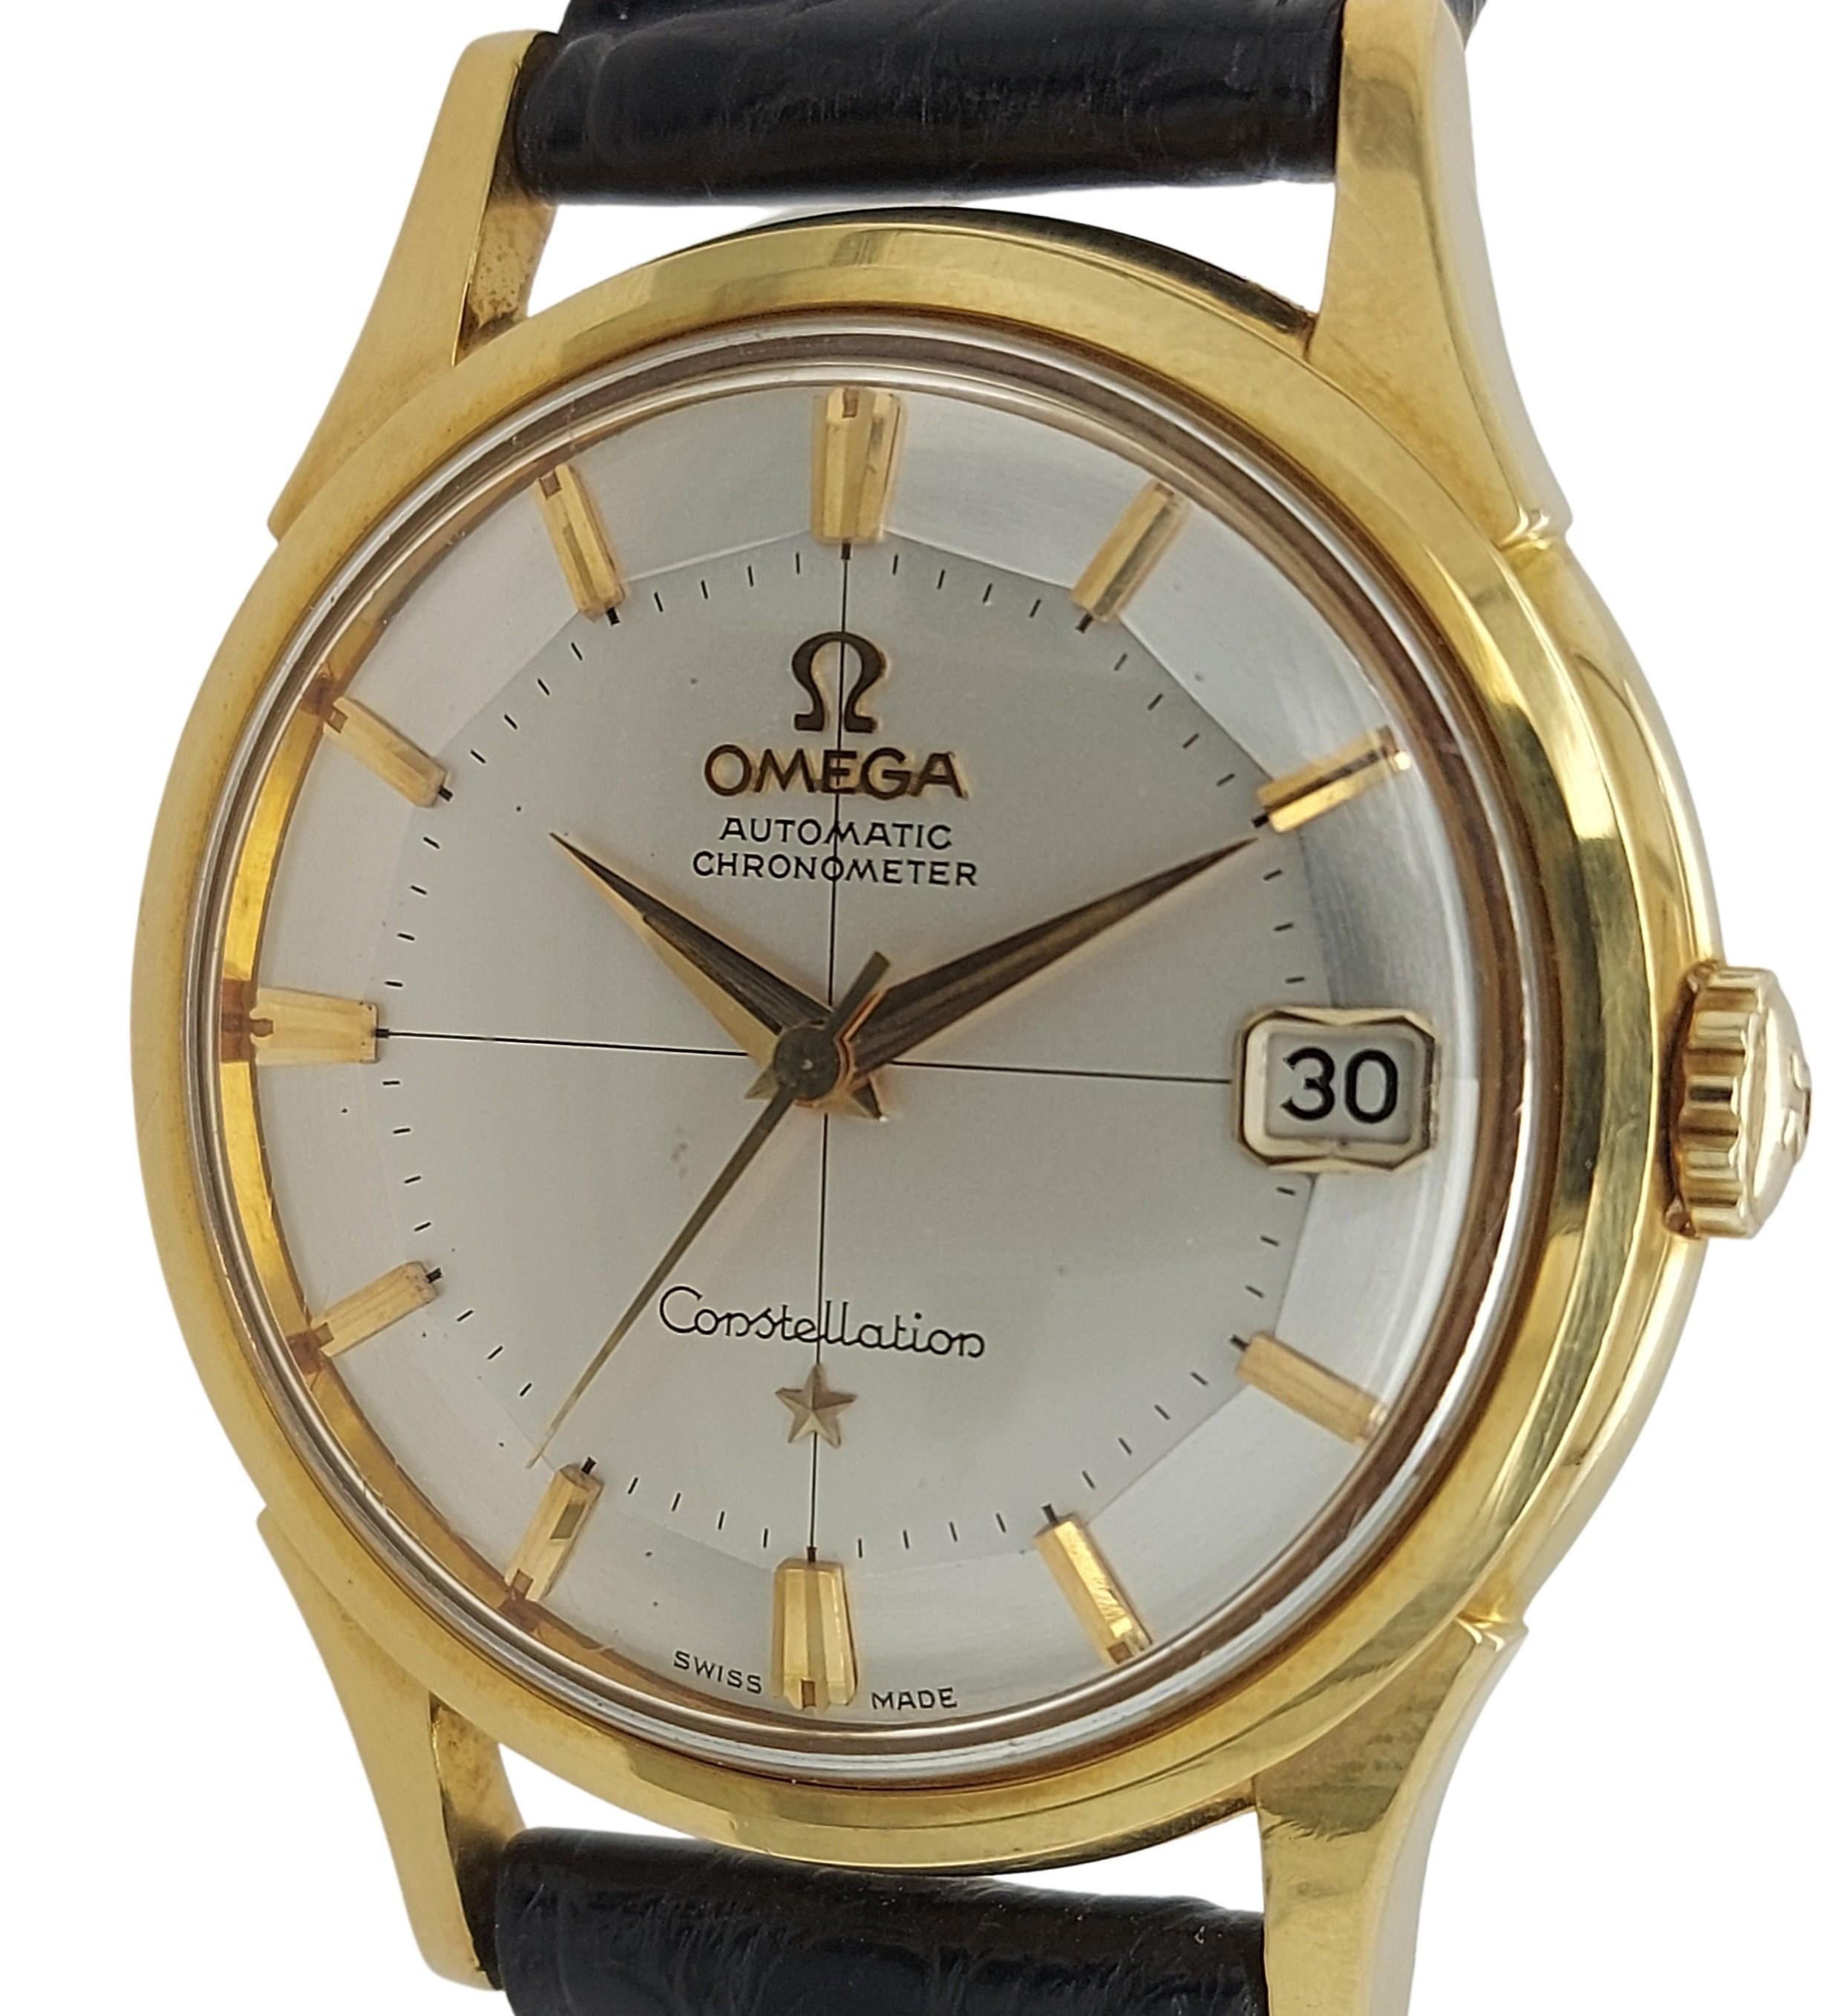 18kt Yellow Gold Omega Constellation Chronometer, Pie Pan Dial Watch 14393/4 SC 8